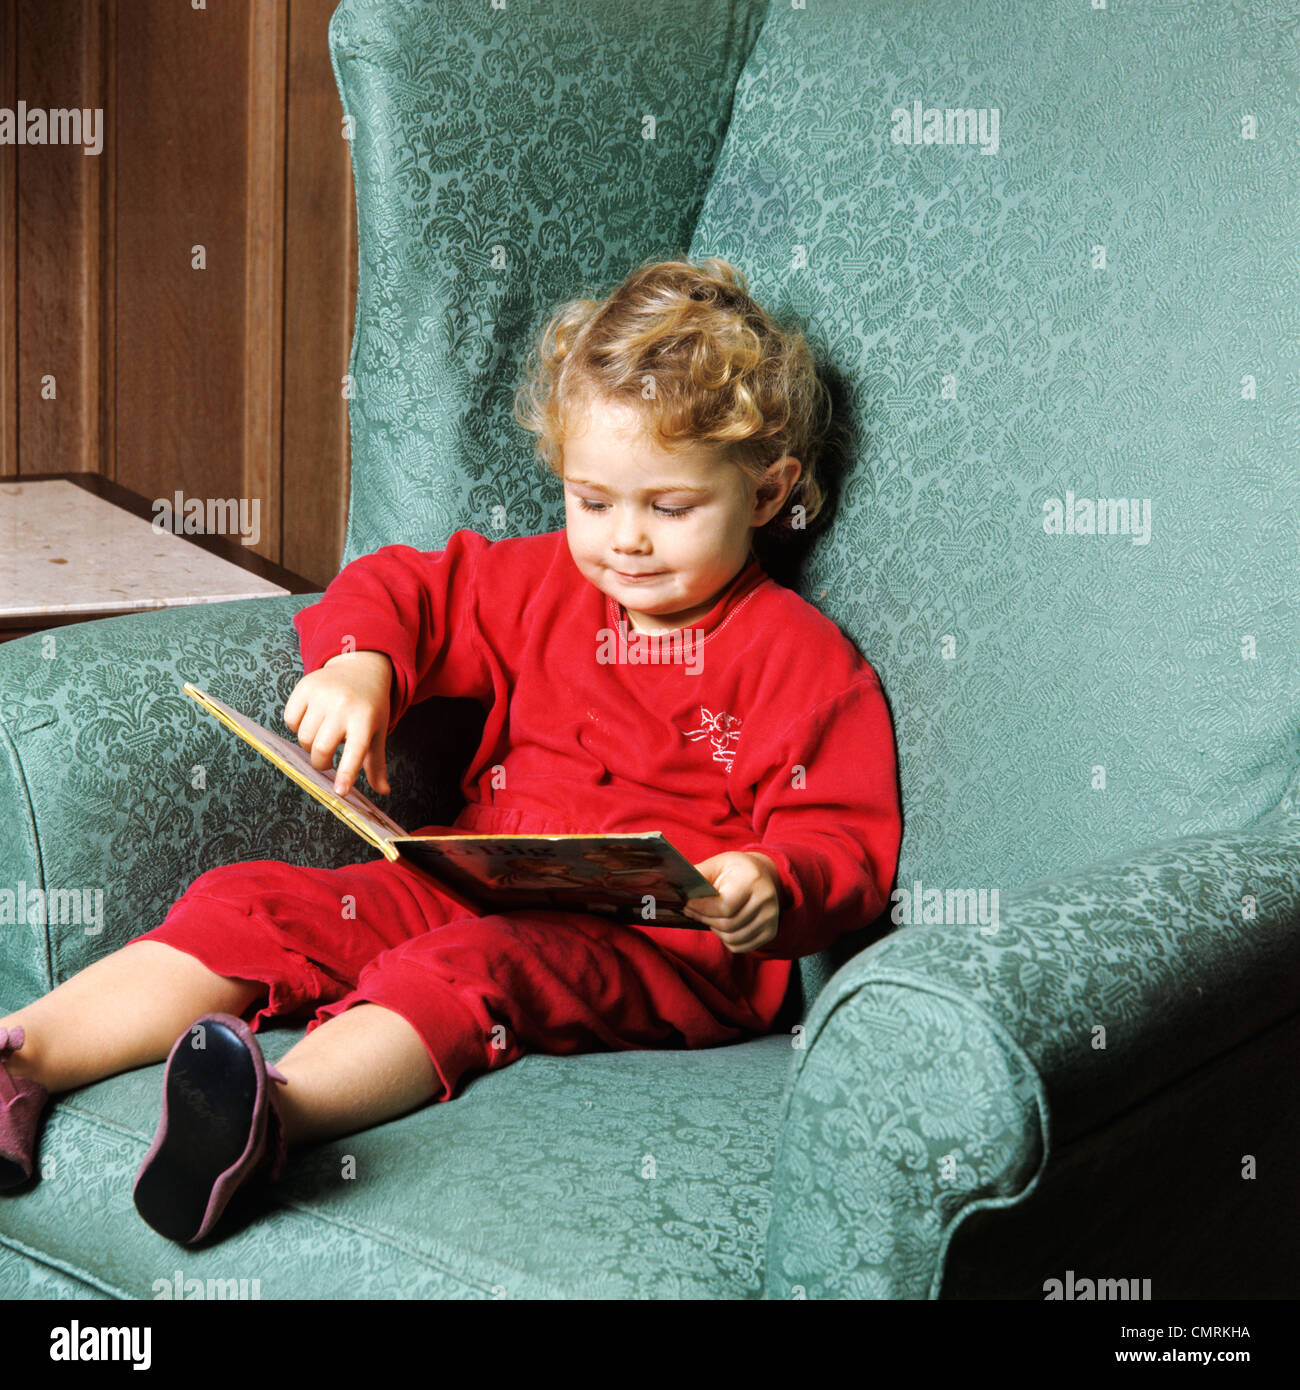 1970s TODDLER GIRL SITTING IN CHAIR READING BOOK RETRO Stock Photo